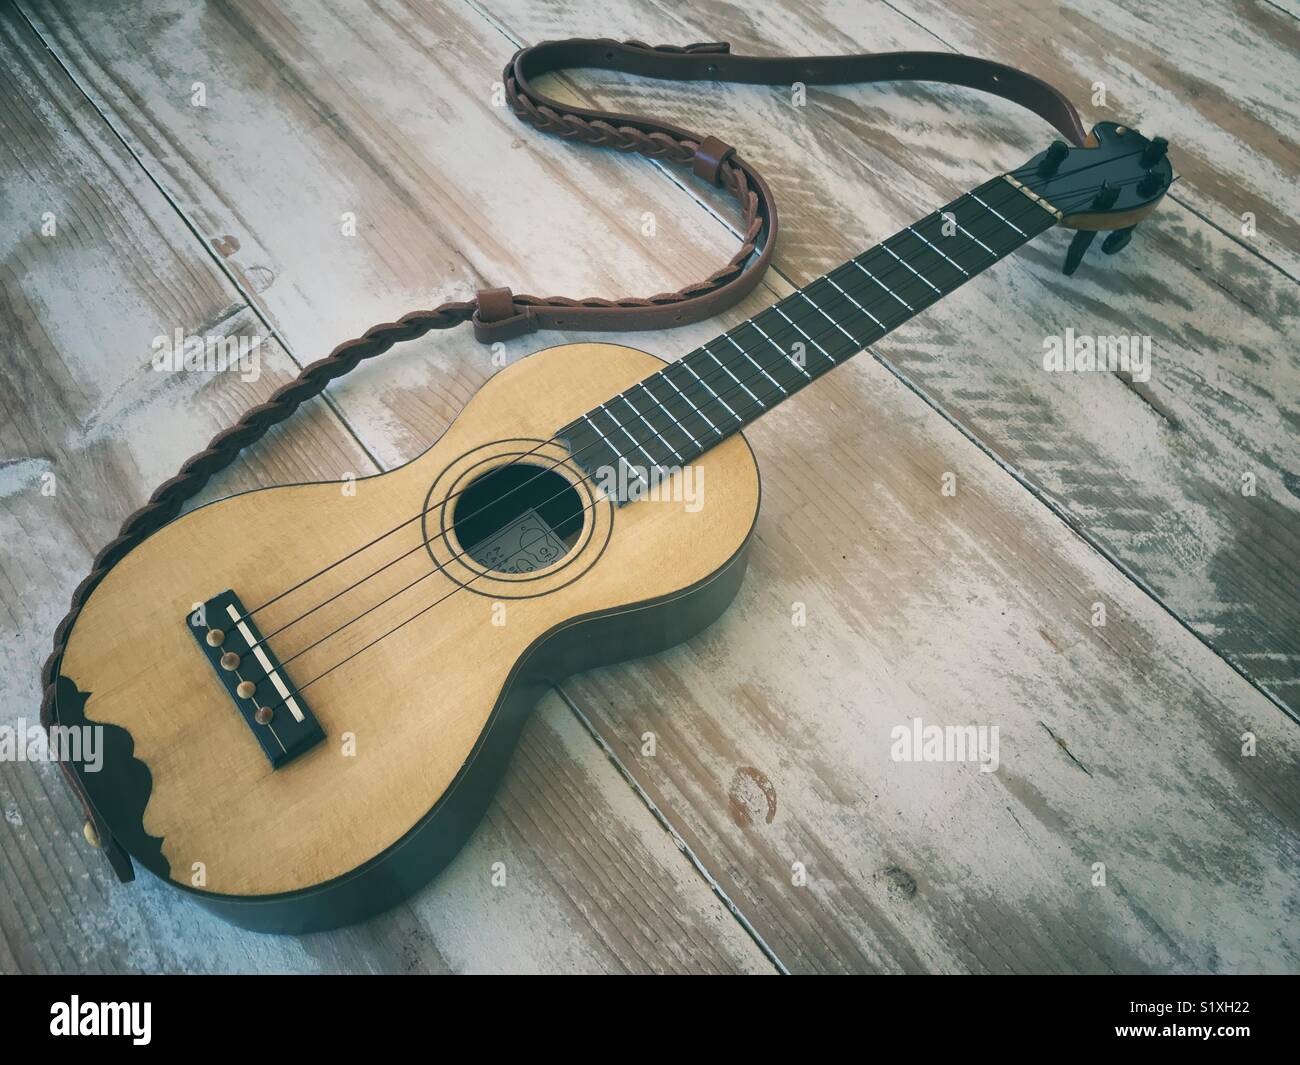 Machete, small 4 stringed guitar from the Island of Madeira, Portugal Stock  Photo - Alamy